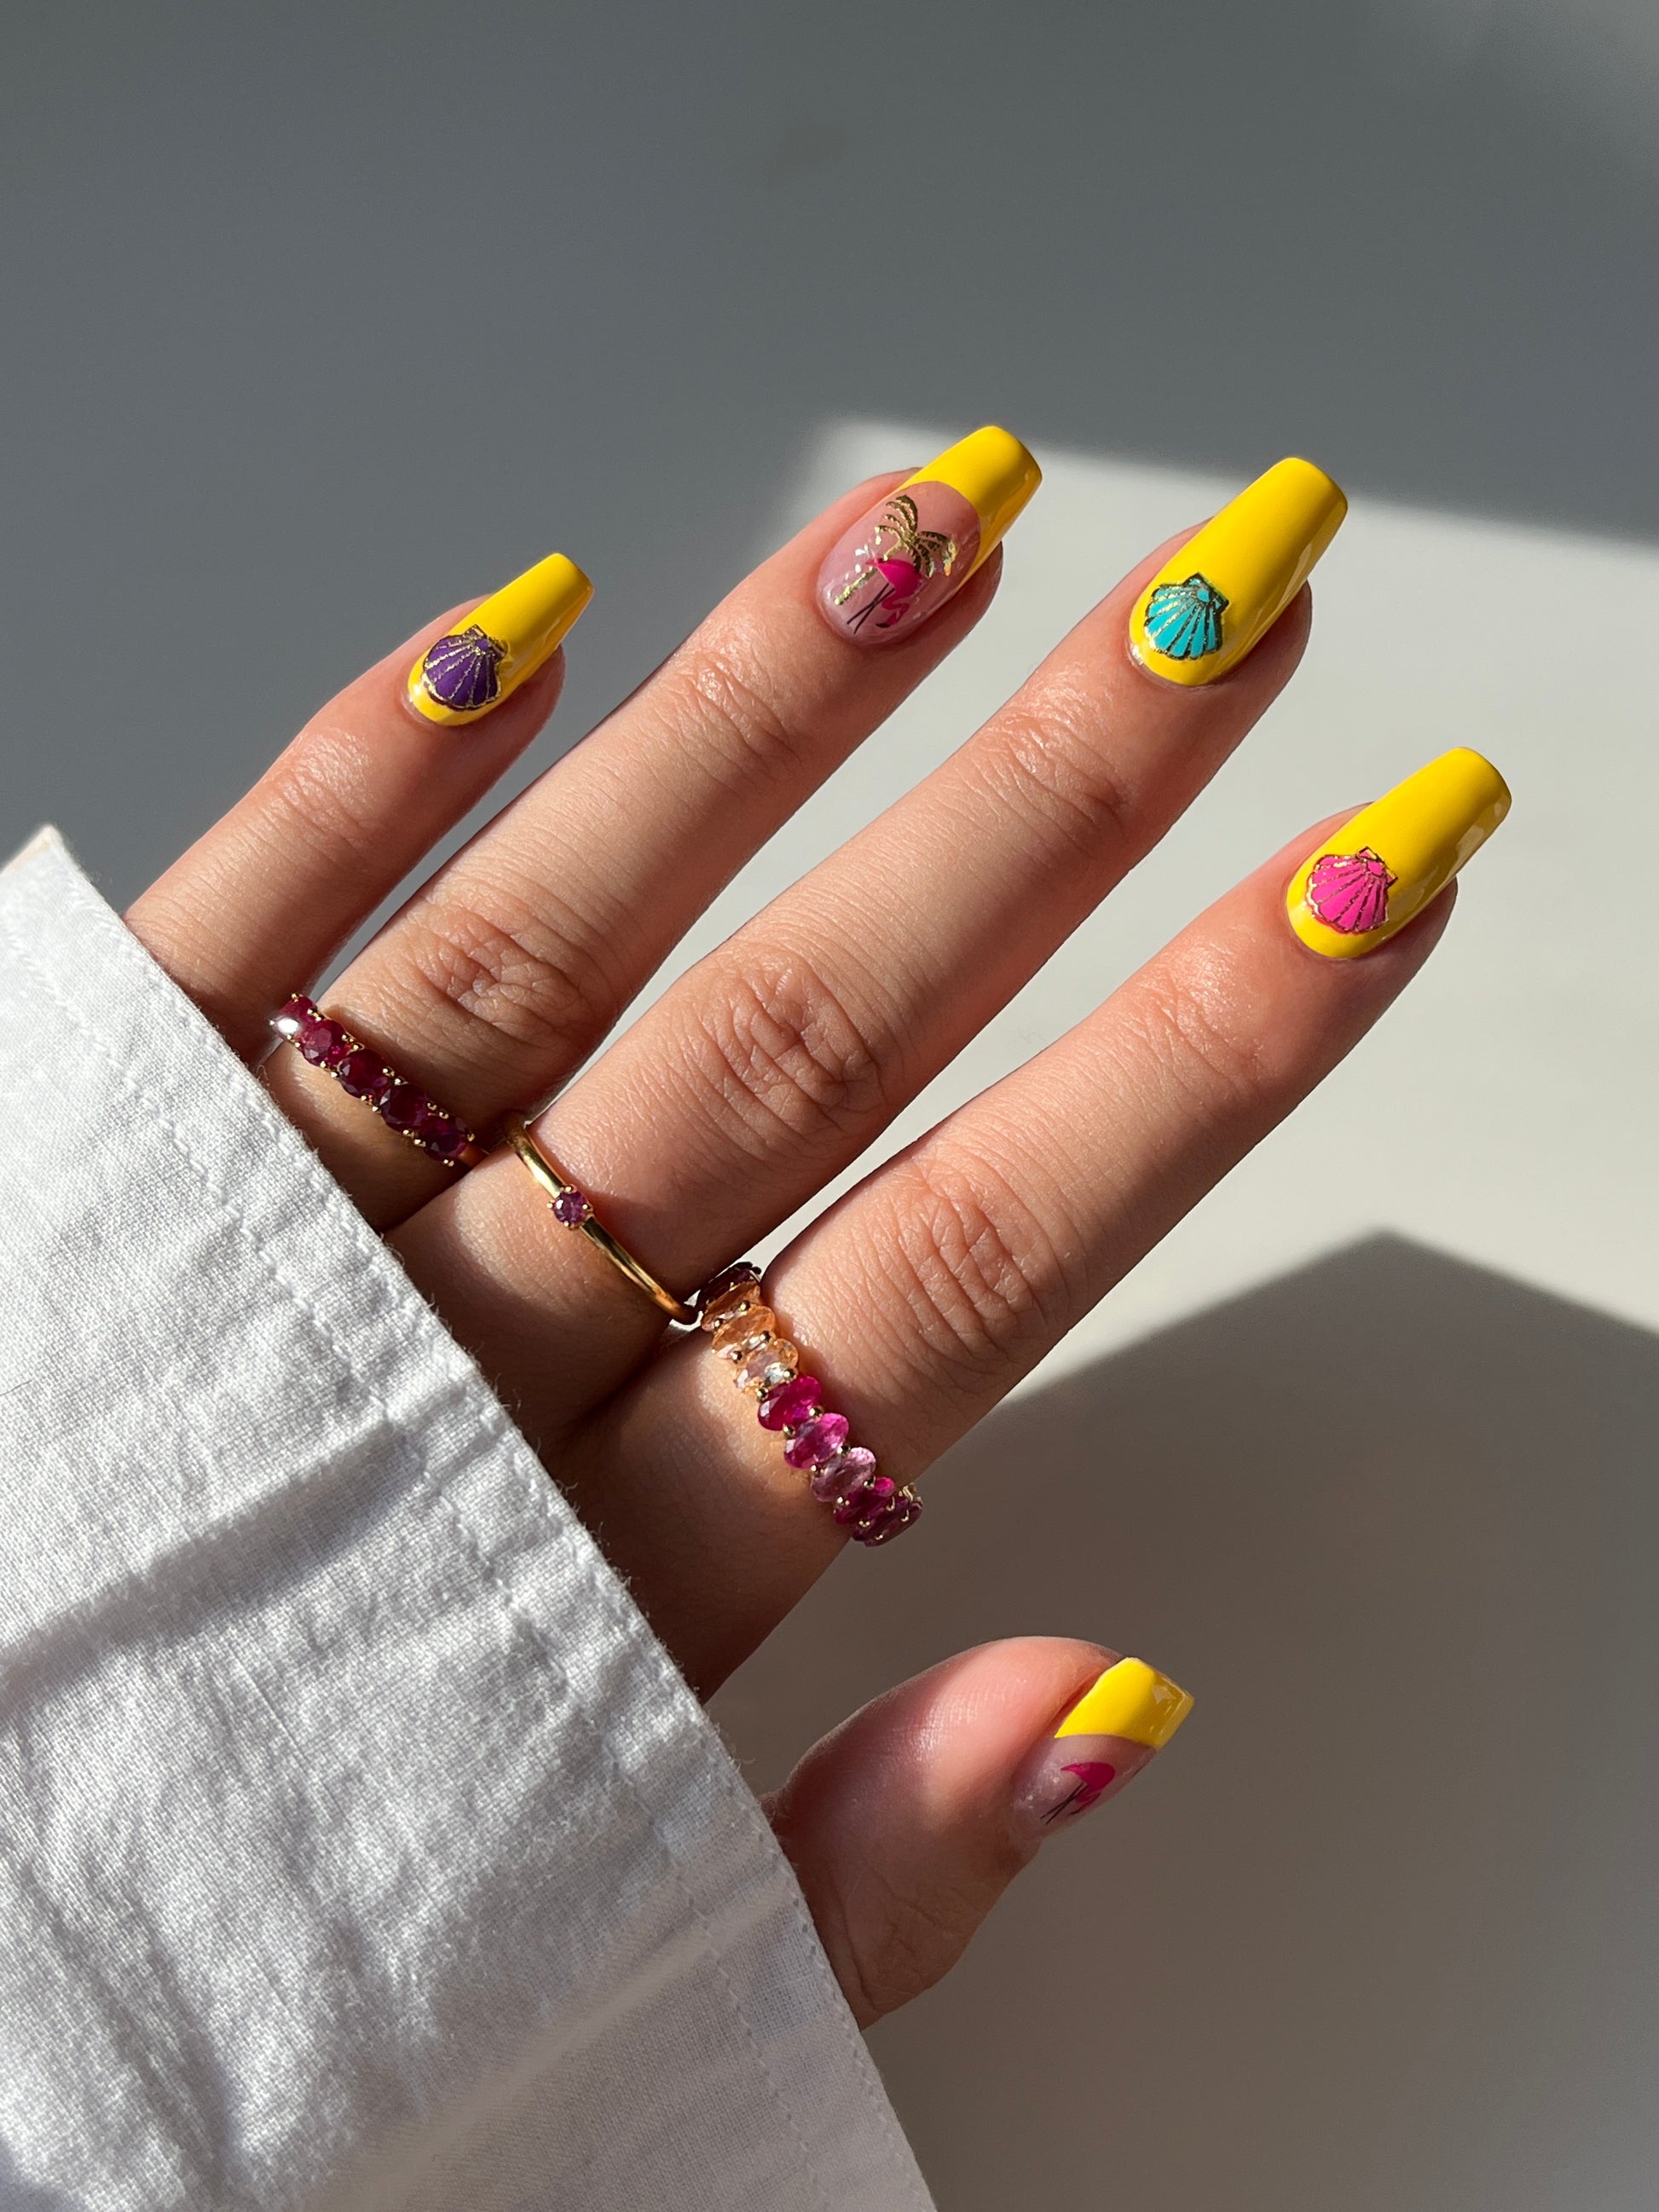 Beach themed mani with yellow tips